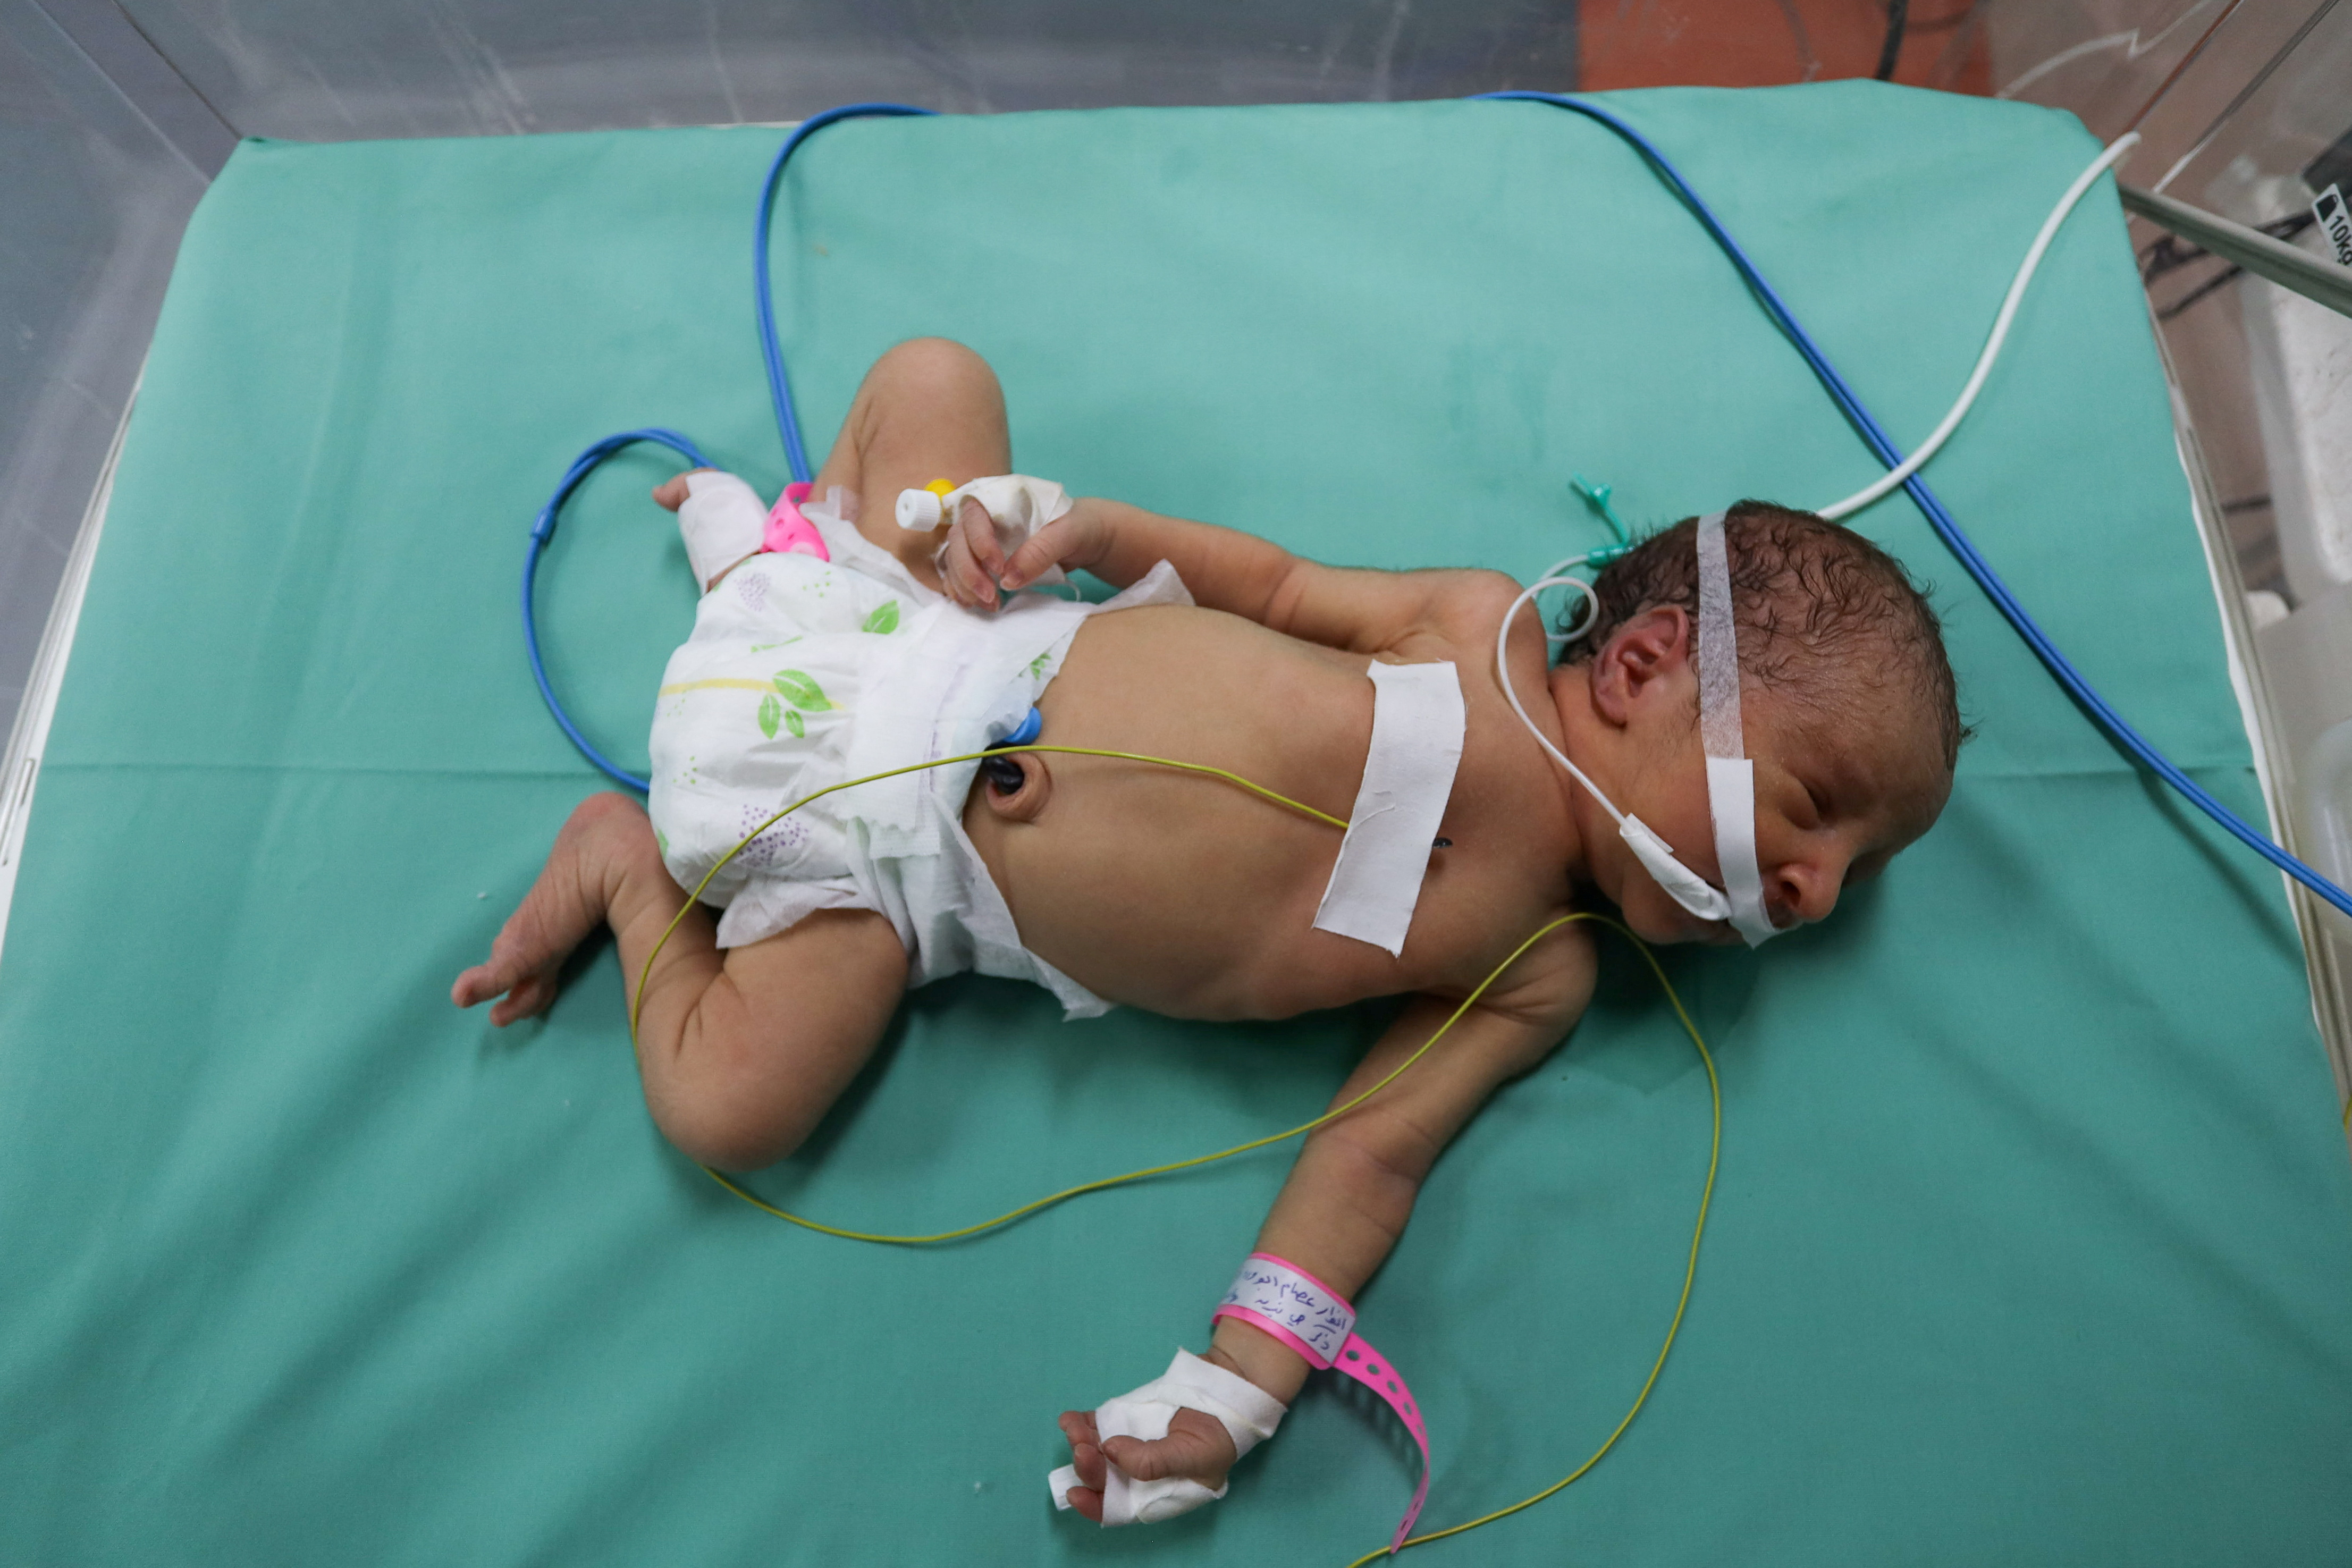 Coronavirus: Newborn Babies at a Thai Hospital Are Being Given